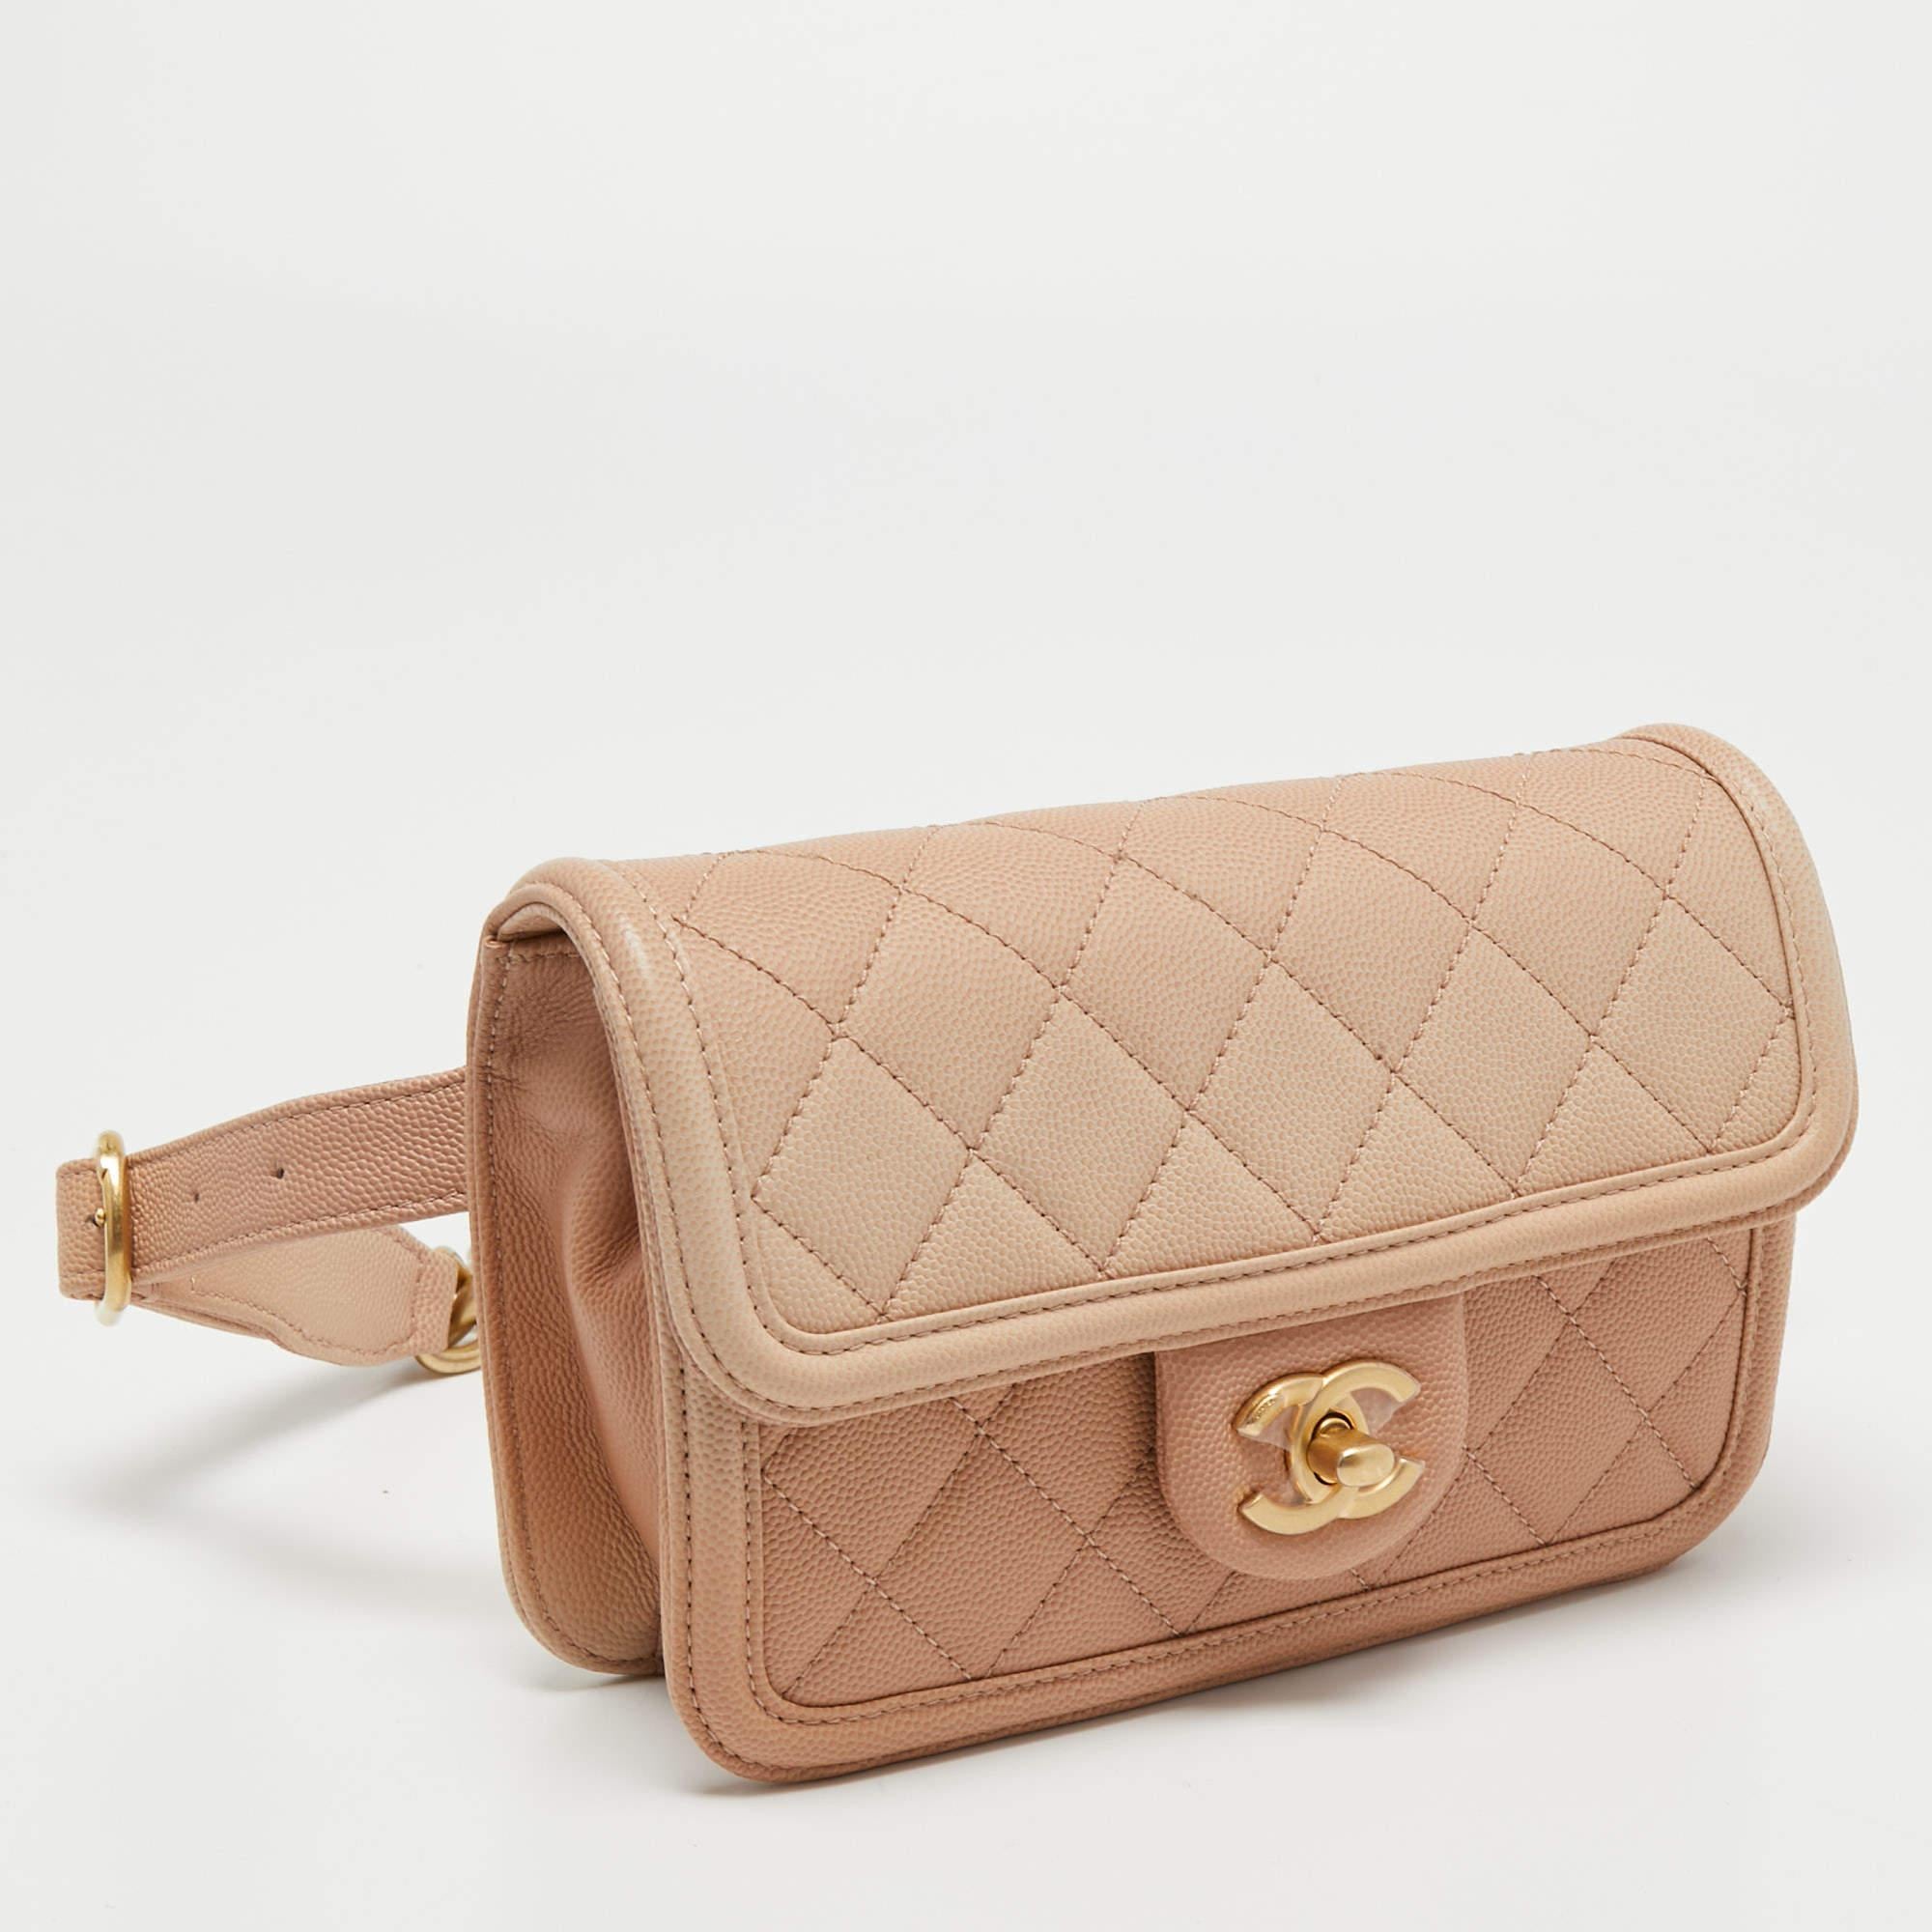 Women's Chanel Beige Ombre Quilted Caviar Leather Sunset On The Sea Belt Bag